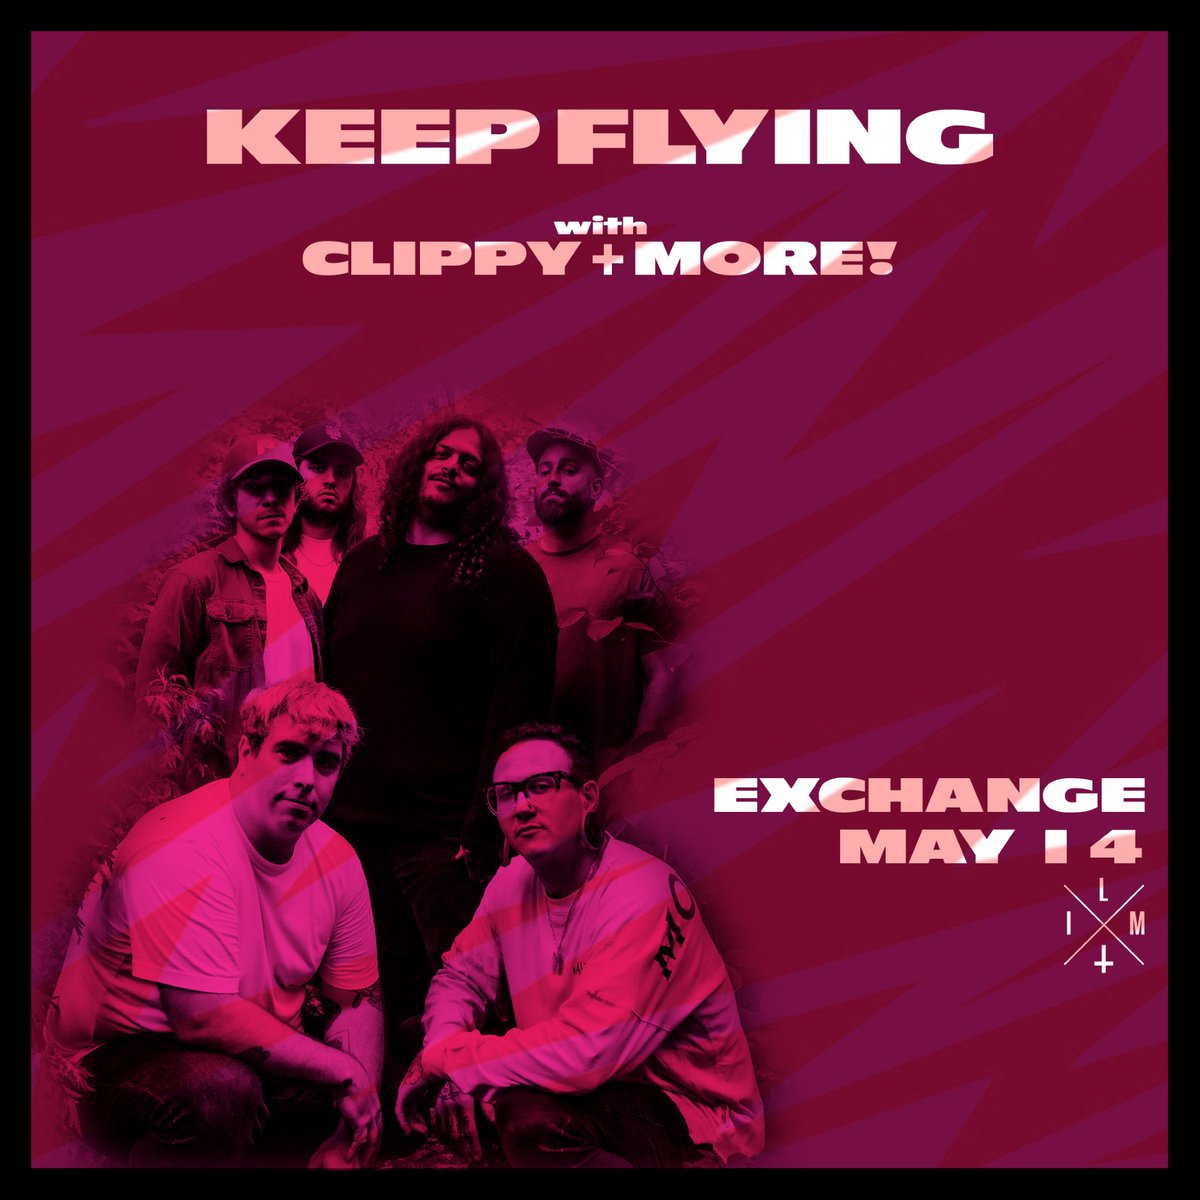 6 piece pop punk with horns! @KeepFlyingBand arrive in town next month // hdfst.uk/e107250